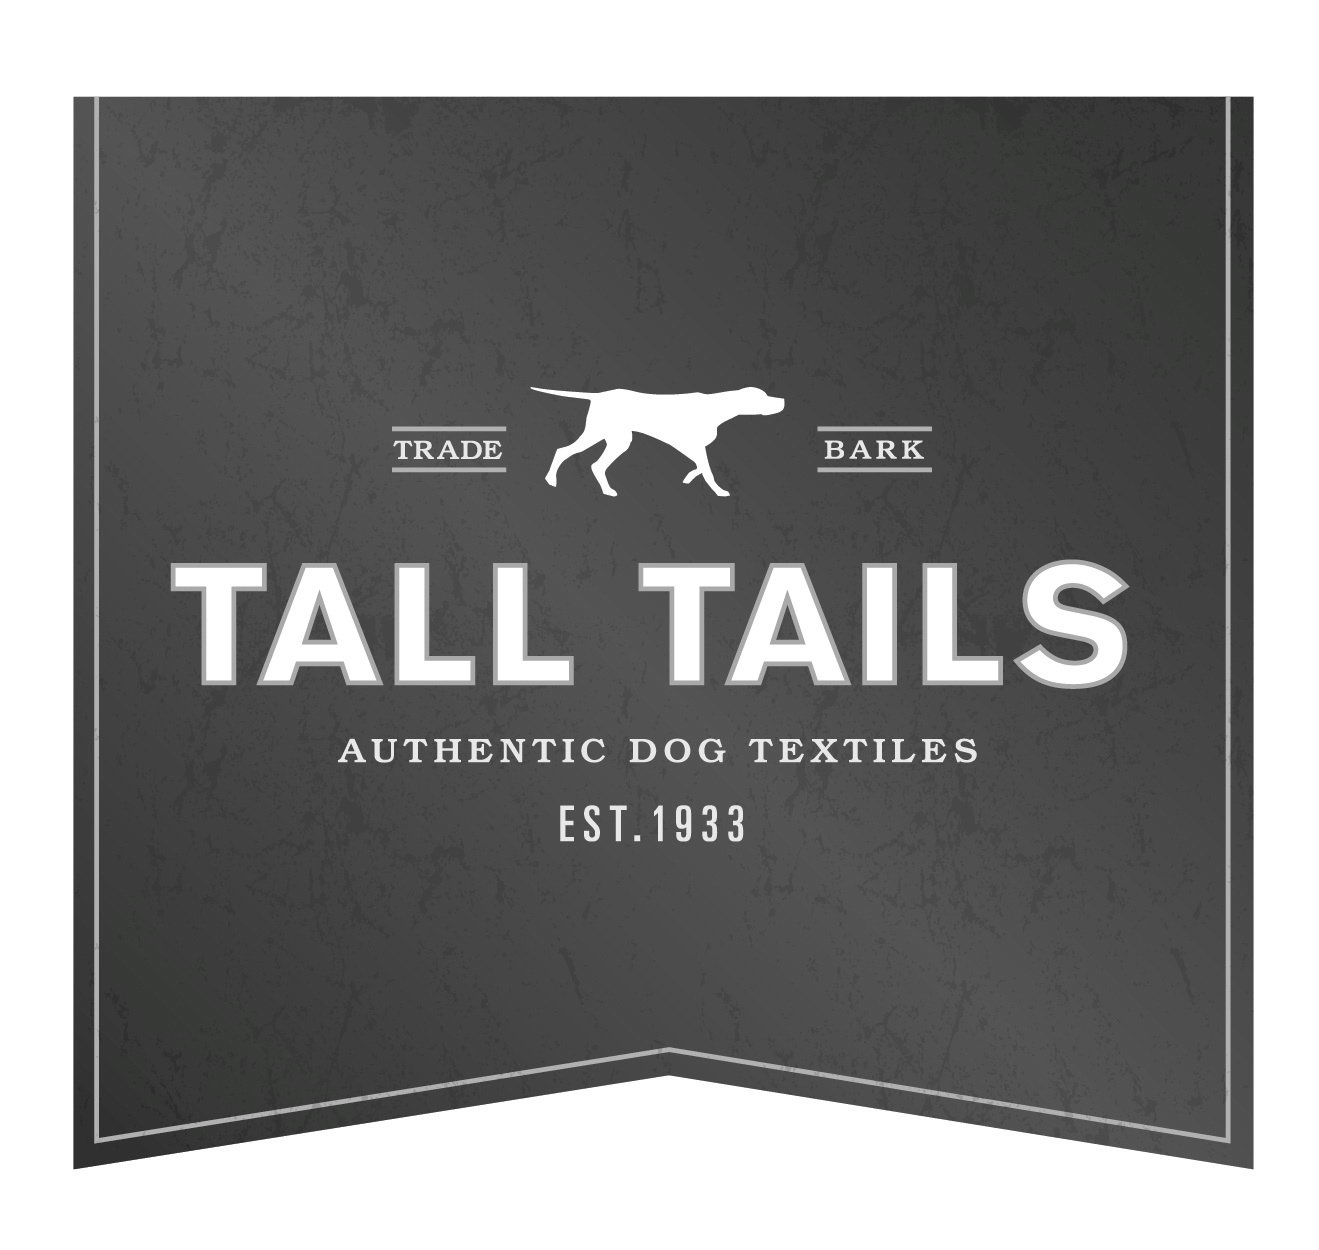  TRADE BARK TALL TAILS AUTHENTIC DOG TEXTILES EST. 1933